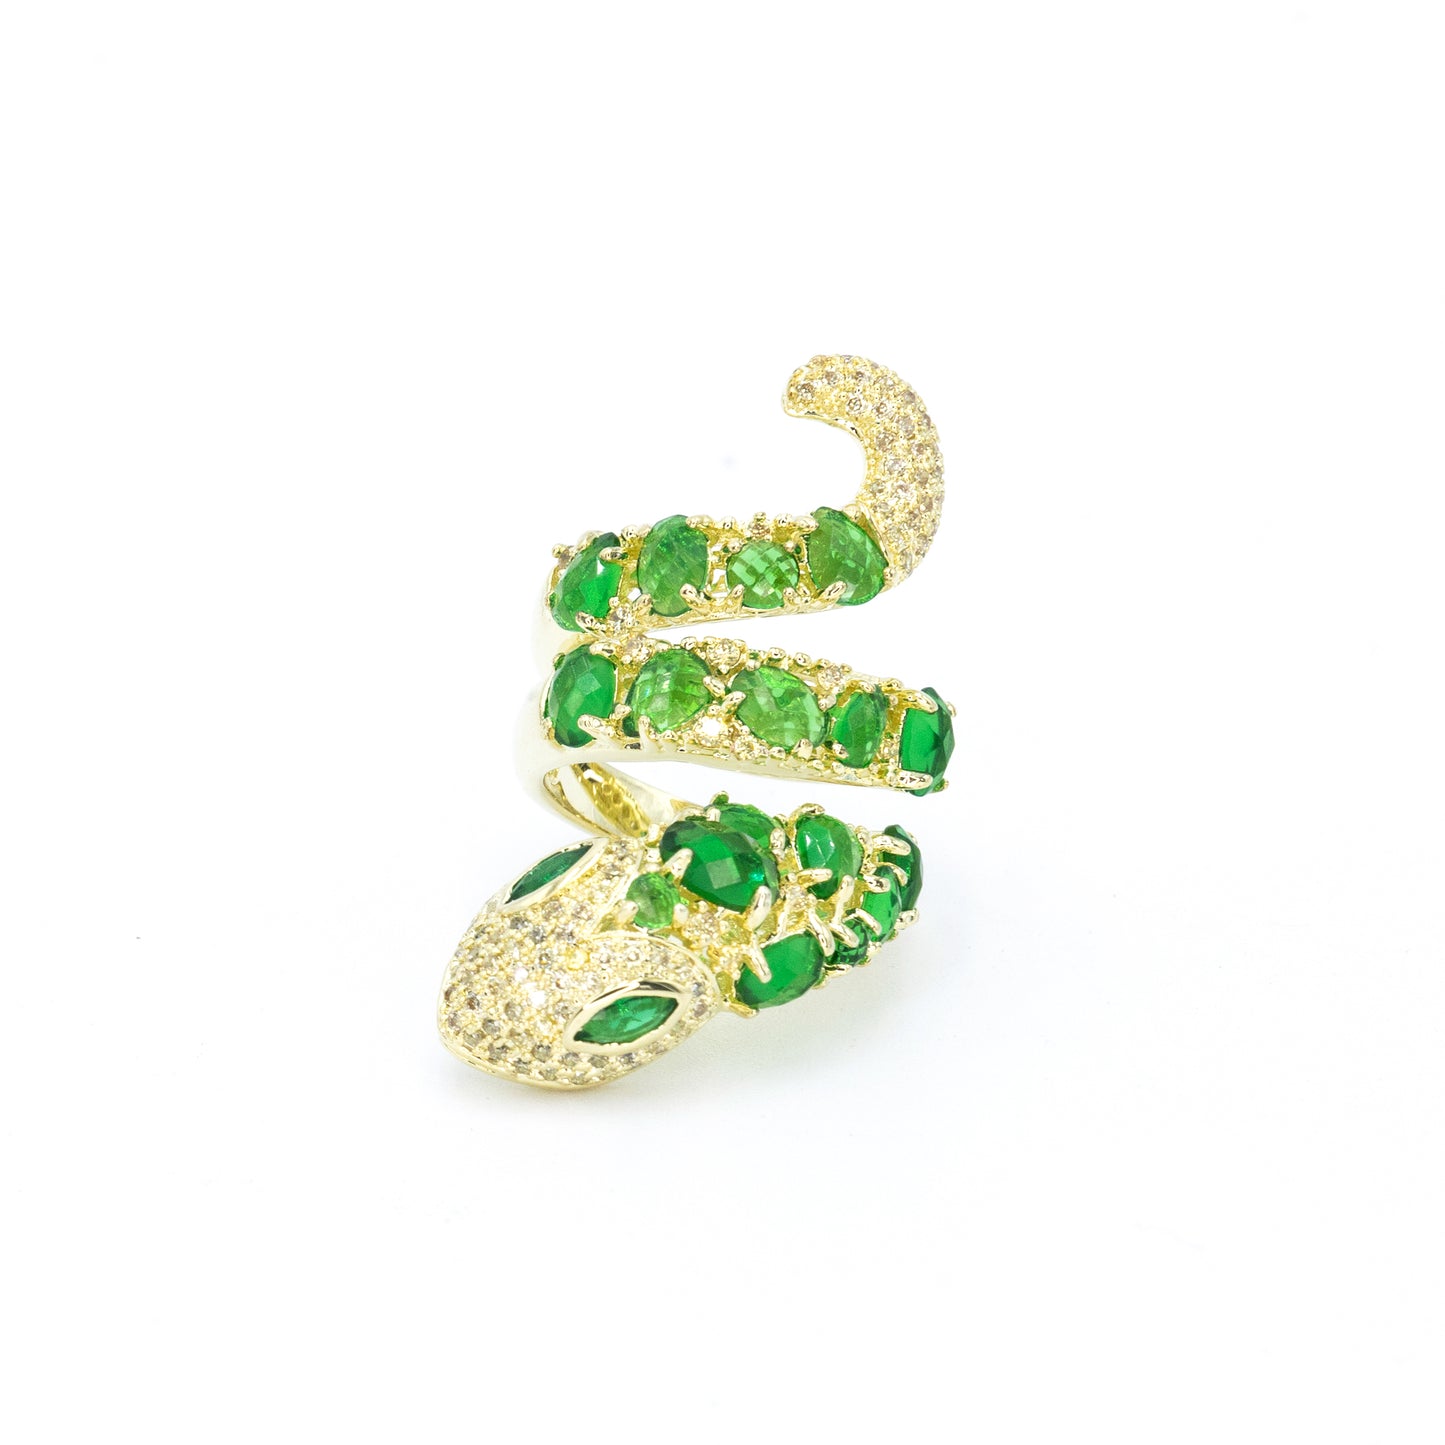 Snake ring w/ emerald stones and 3A CZ stones rhodium G plated